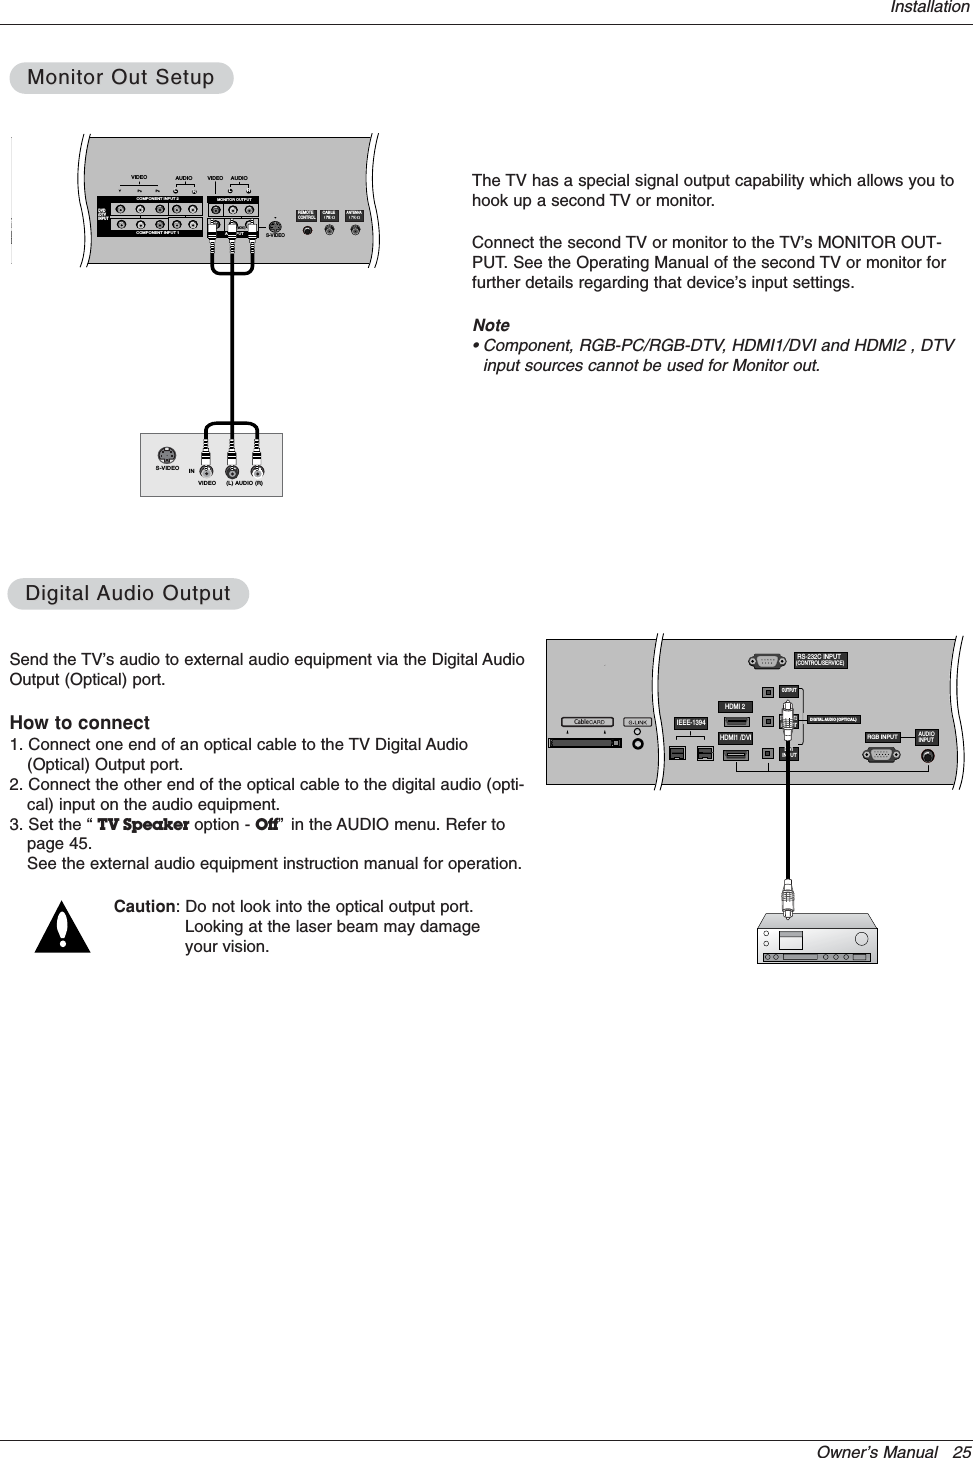 Owner’s Manual   25InstallationSend the TV’s audio to external audio equipment via the Digital AudioOutput (Optical) port.How to connect1. Connect one end of an optical cable to the TV Digital Audio(Optical) Output port.2. Connect the other end of the optical cable to the digital audio (opti-cal) input on the audio equipment.3. Set the “ TV Speaker option - Off” in the AUDIO menu. Refer topage 45.See the external audio equipment instruction manual for operation.Caution: Do not look into the optical output port.Looking at the laser beam may damageyour vision.DigitalDigital Audio OutputAudio OutputRS-232C INPUT(CONTROL/SERVICE)DIGITAL AUDIO (OPTICAL)DVIINPUTCOMPONENT2INPUTOUTPUTRGB INPUTHDMI 2HDMI1 /DVIDVD/DTVINPUTIEEE-1394AUDIOINPUTCableThe TV has a special signal output capability which allows you tohook up a second TV or monitor.Connect the second TV or monitor to the TV’s MONITOR OUT-PUT. See the Operating Manual of the second TV or monitor forfurther details regarding that device’s input settings.Note• Component, RGB-PC/RGB-DTV, HDMI1/DVI and HDMI2 , DTVinput sources cannot be used for Monitor out.AUDIORLAUDIO INPUTRGB INPUTVIDEOCOMPONENT INPUT 1RL(MONO)CABLEANTENNA AC  INPUTDVD/DTVINPUTCOMPONENT INPUT 2MONITOR OUTPUTA/V INPUT VIDEOAUDIOS-VIDEO IN(L) AUDIO (R)VIDEOS-VIDEOREMOTECONTROLMonitor Out SetupMonitor Out Setup